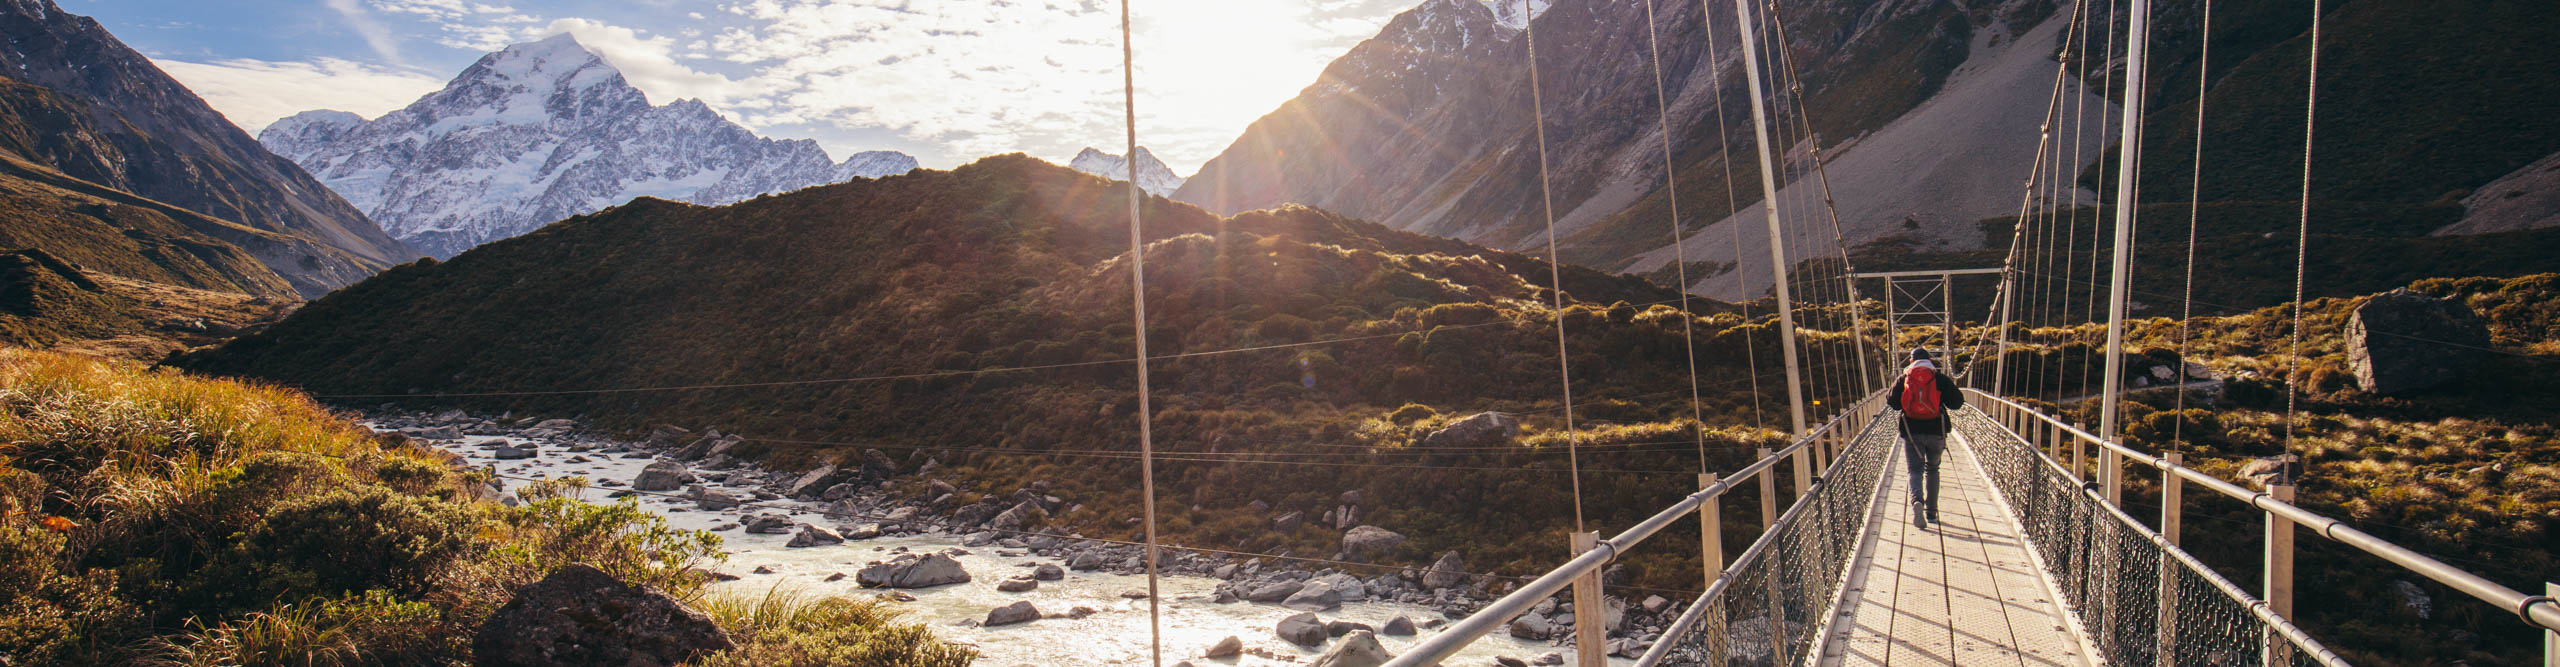 Hiker crossing bridge on the trail to Mount Cook, New Zealand